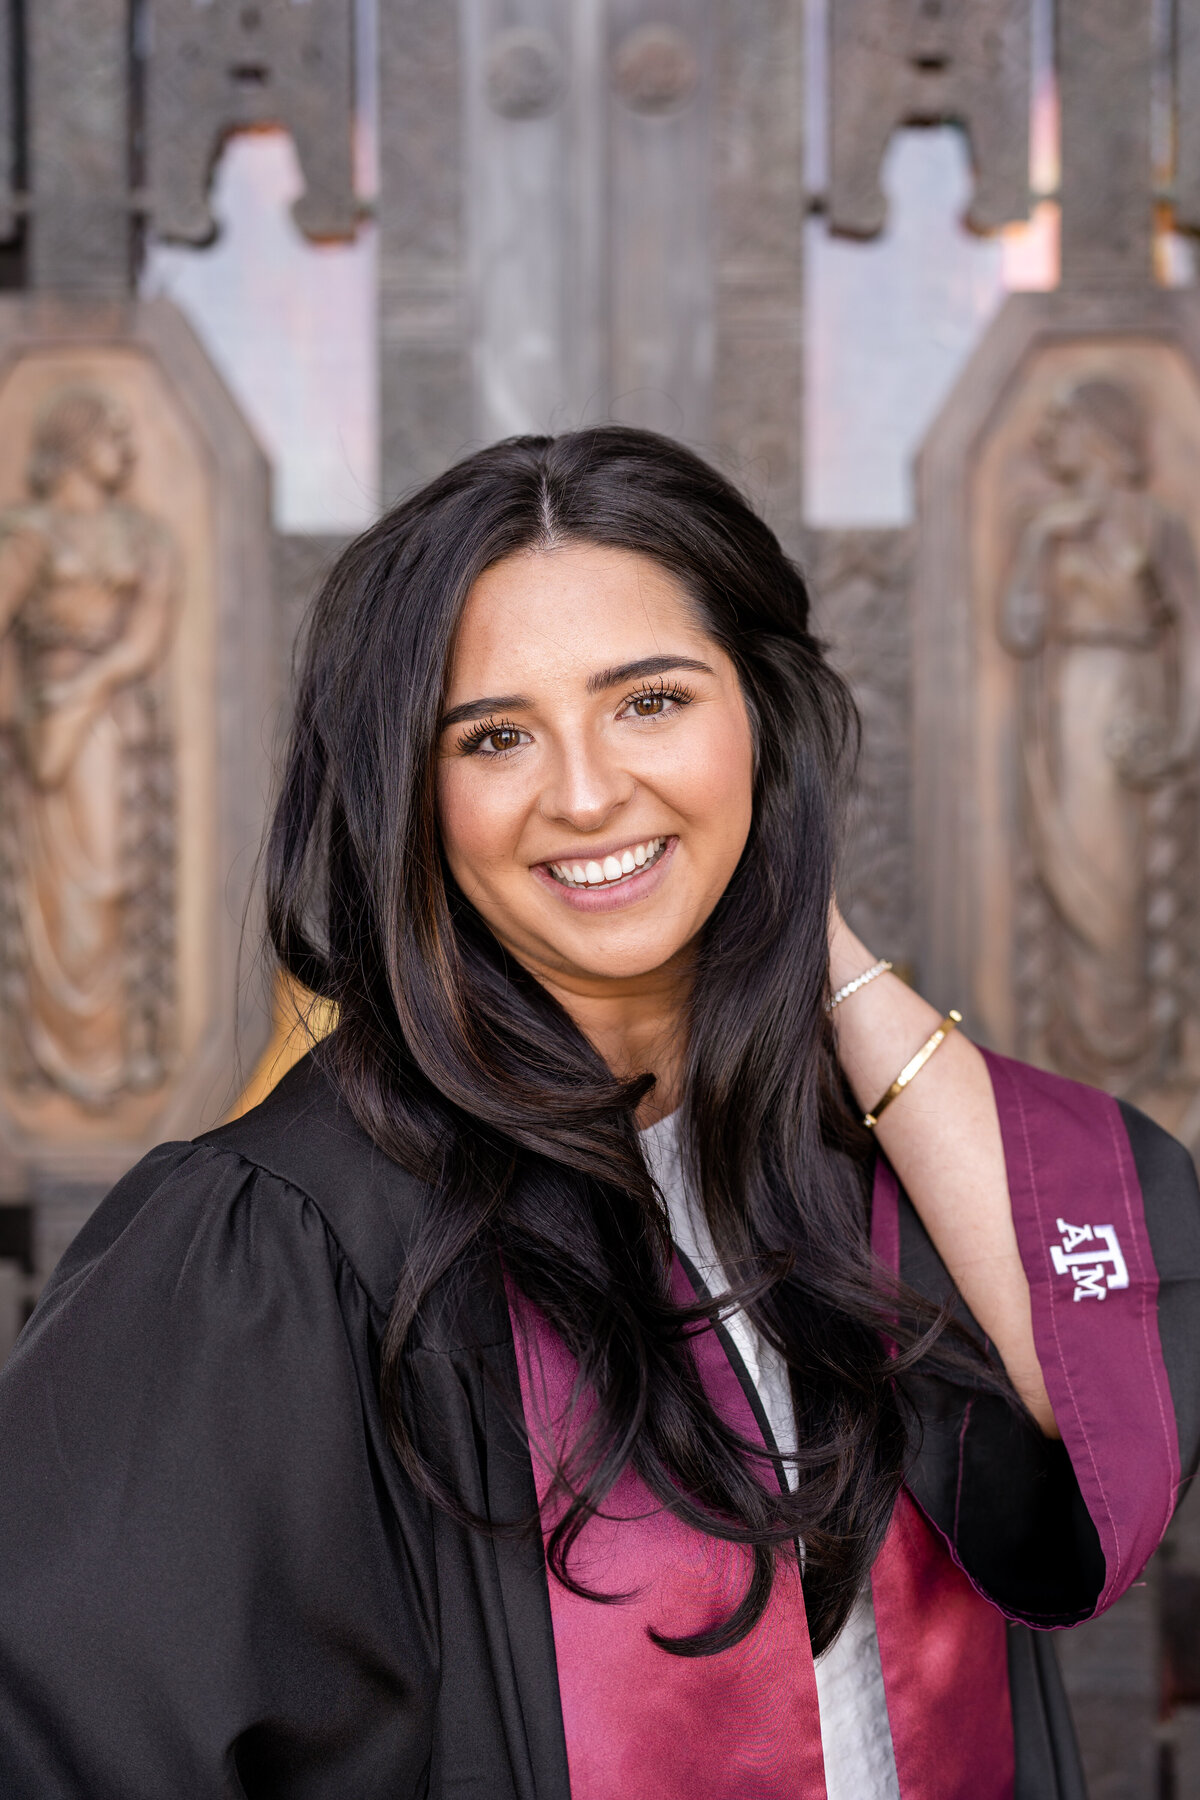 Texas A&M senior girl with hand in hair while wearing gown and maroon stole and smiling while standing in front of Administration Building front doors